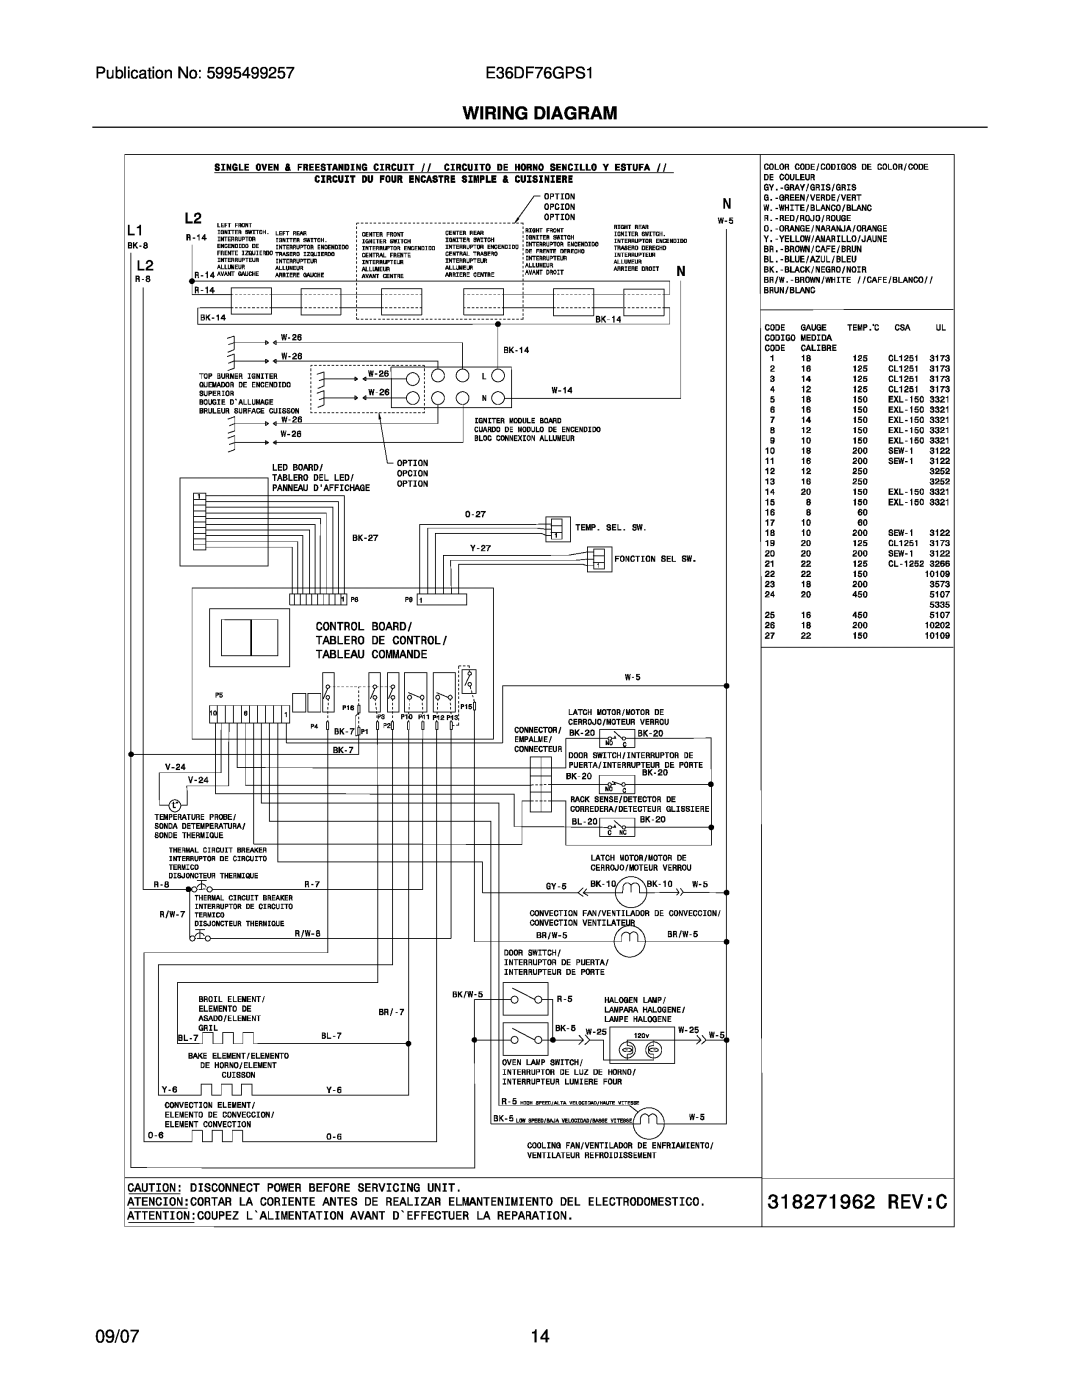 Electrolux 30166673P70S1 installation instructions Wiring Diagram, 09/07, E36DF76GPS1 